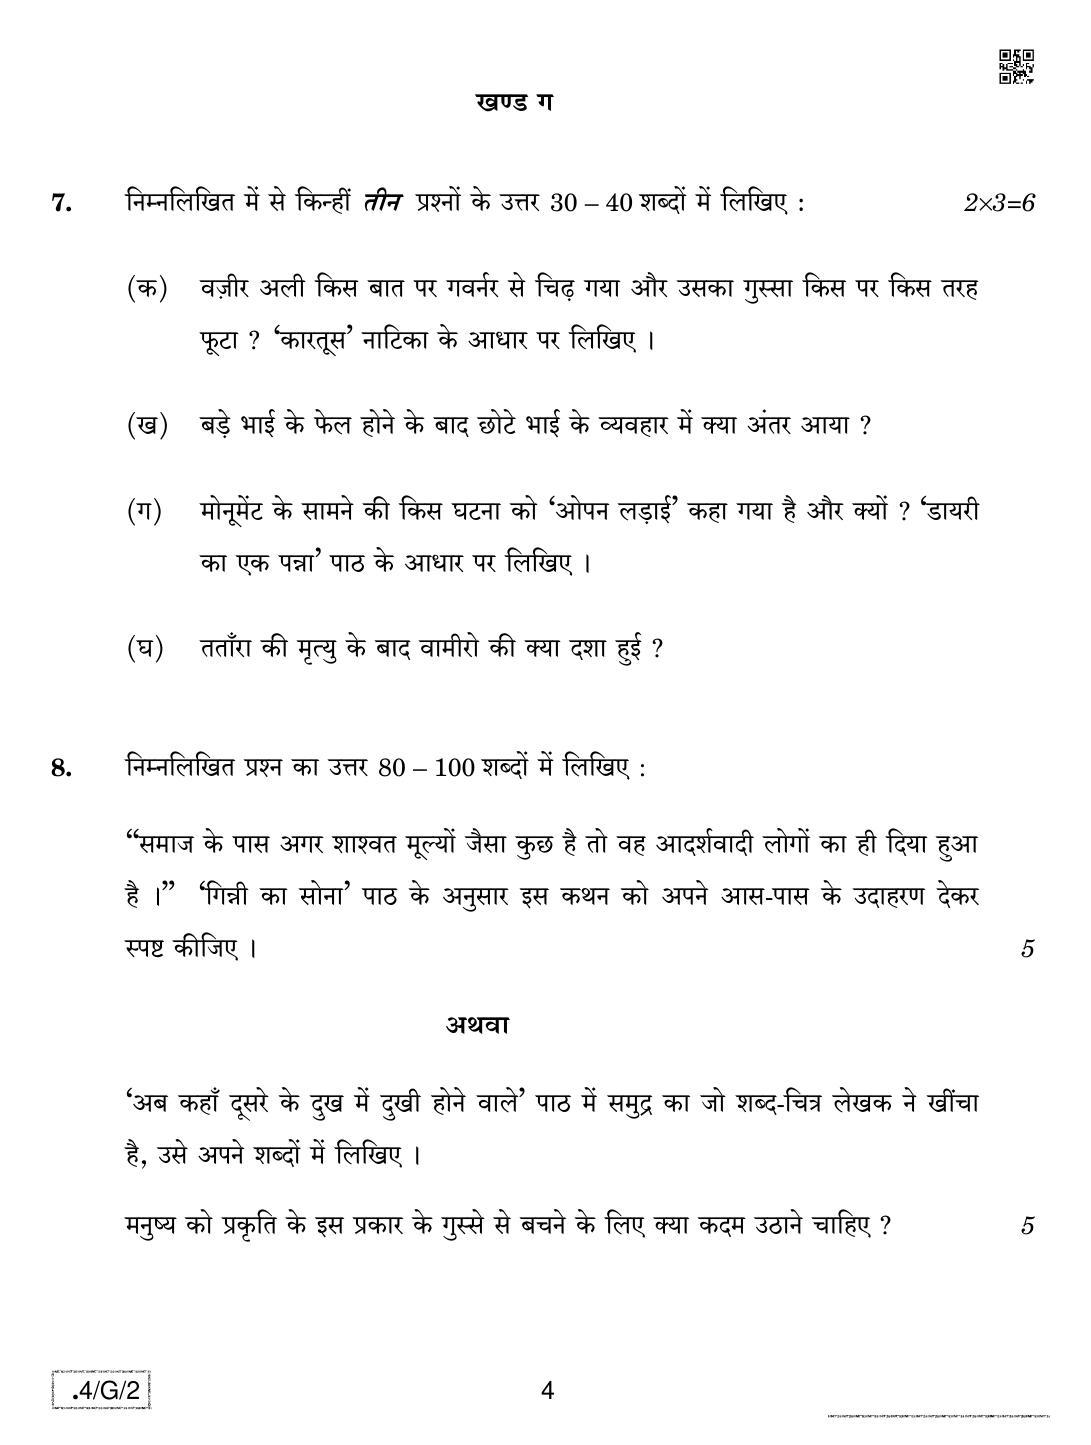 CBSE Class 10 4-C-2 Hindi B 2020 Compartment Question Paper - Page 4